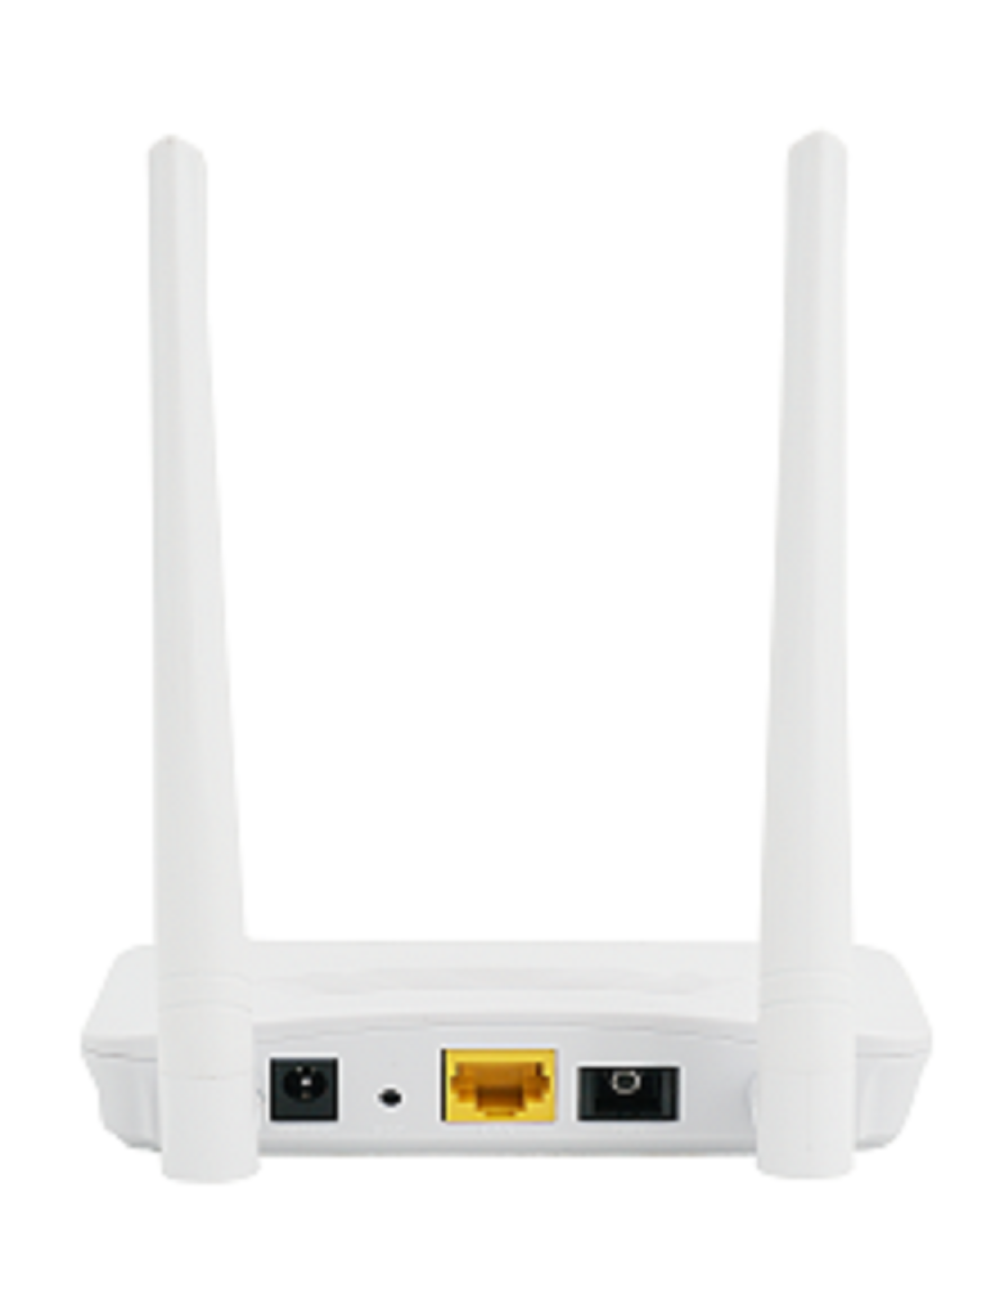 Router Gpon Price in Pakistan | Router Gpon for Sale in Pakistan